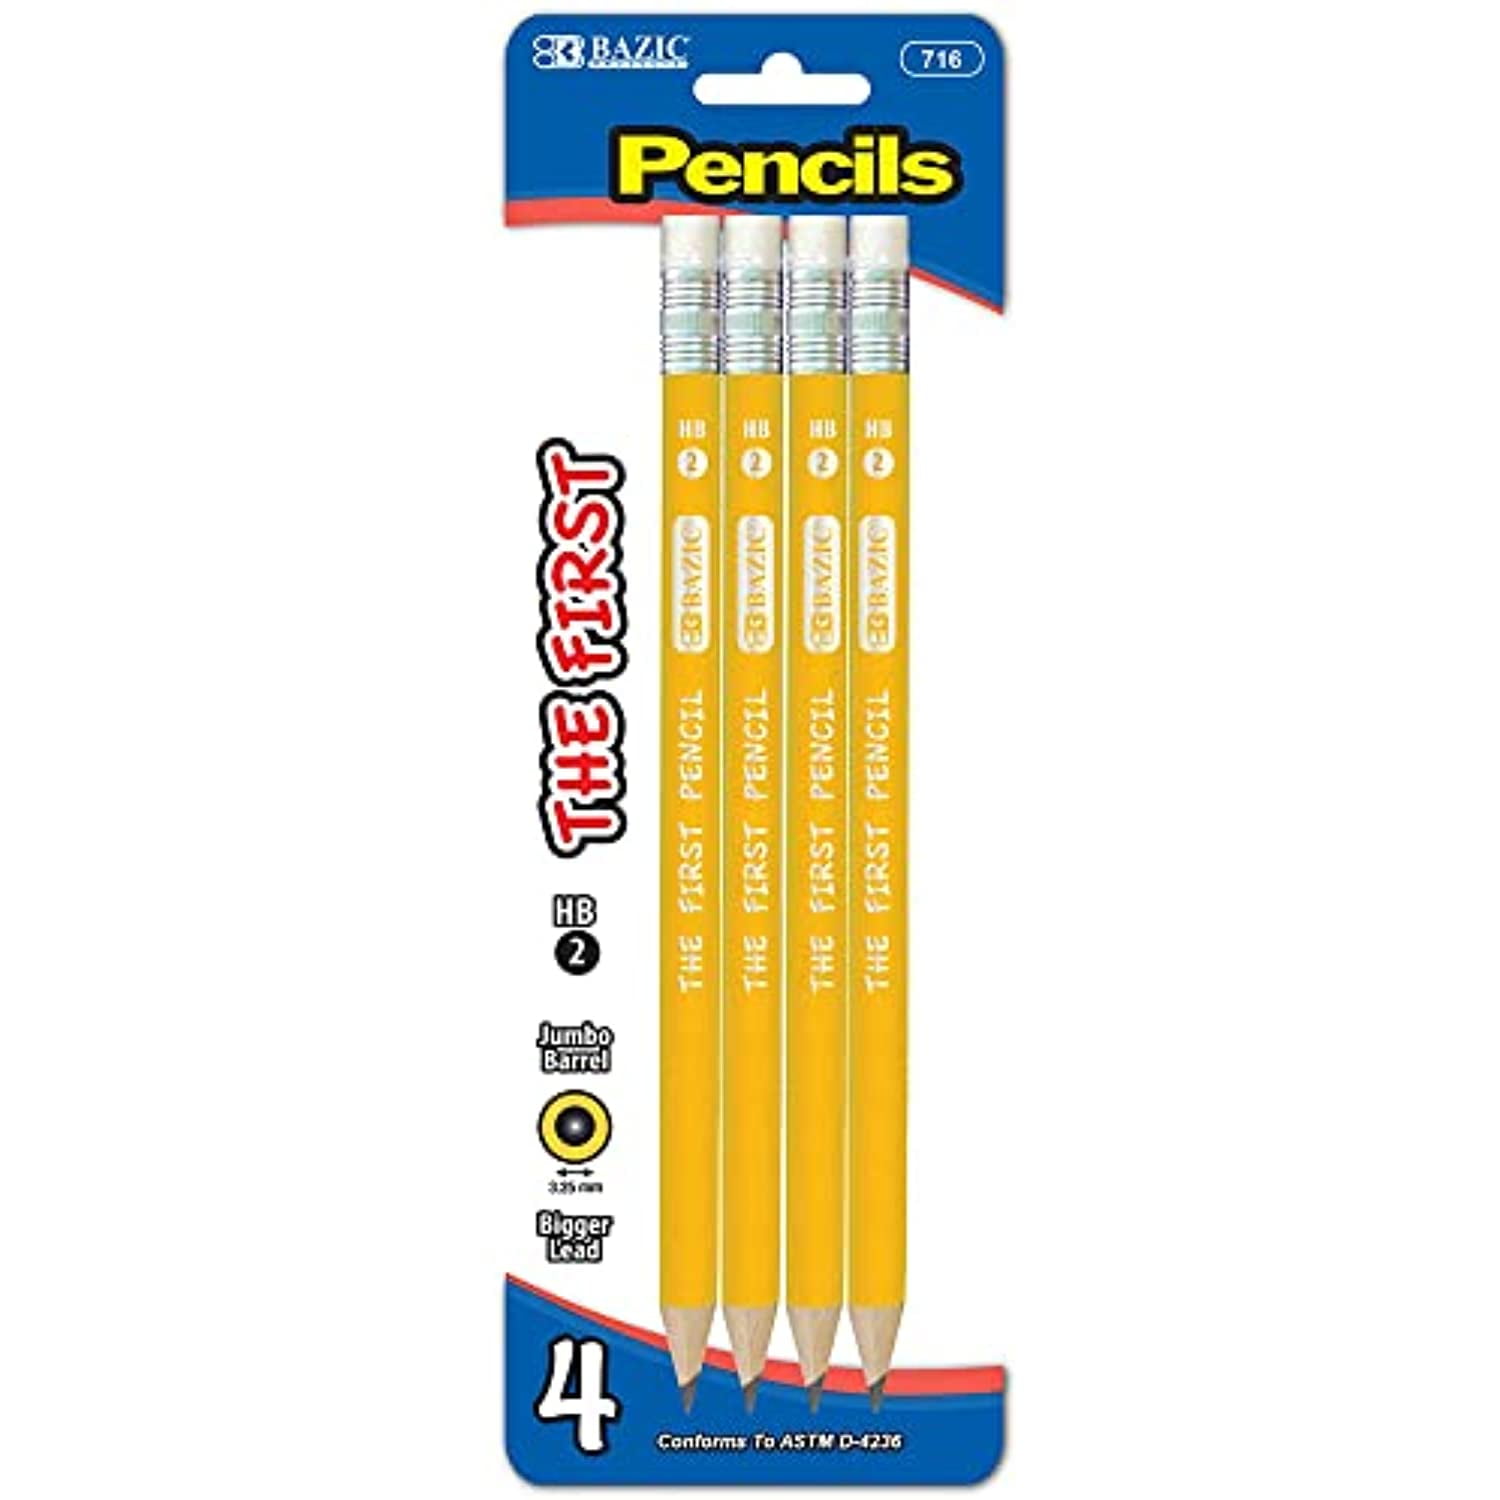 LEGO 9 Graphite Pencils with 2 Blue & Yellow LEGO Toppers Deal of the Day 